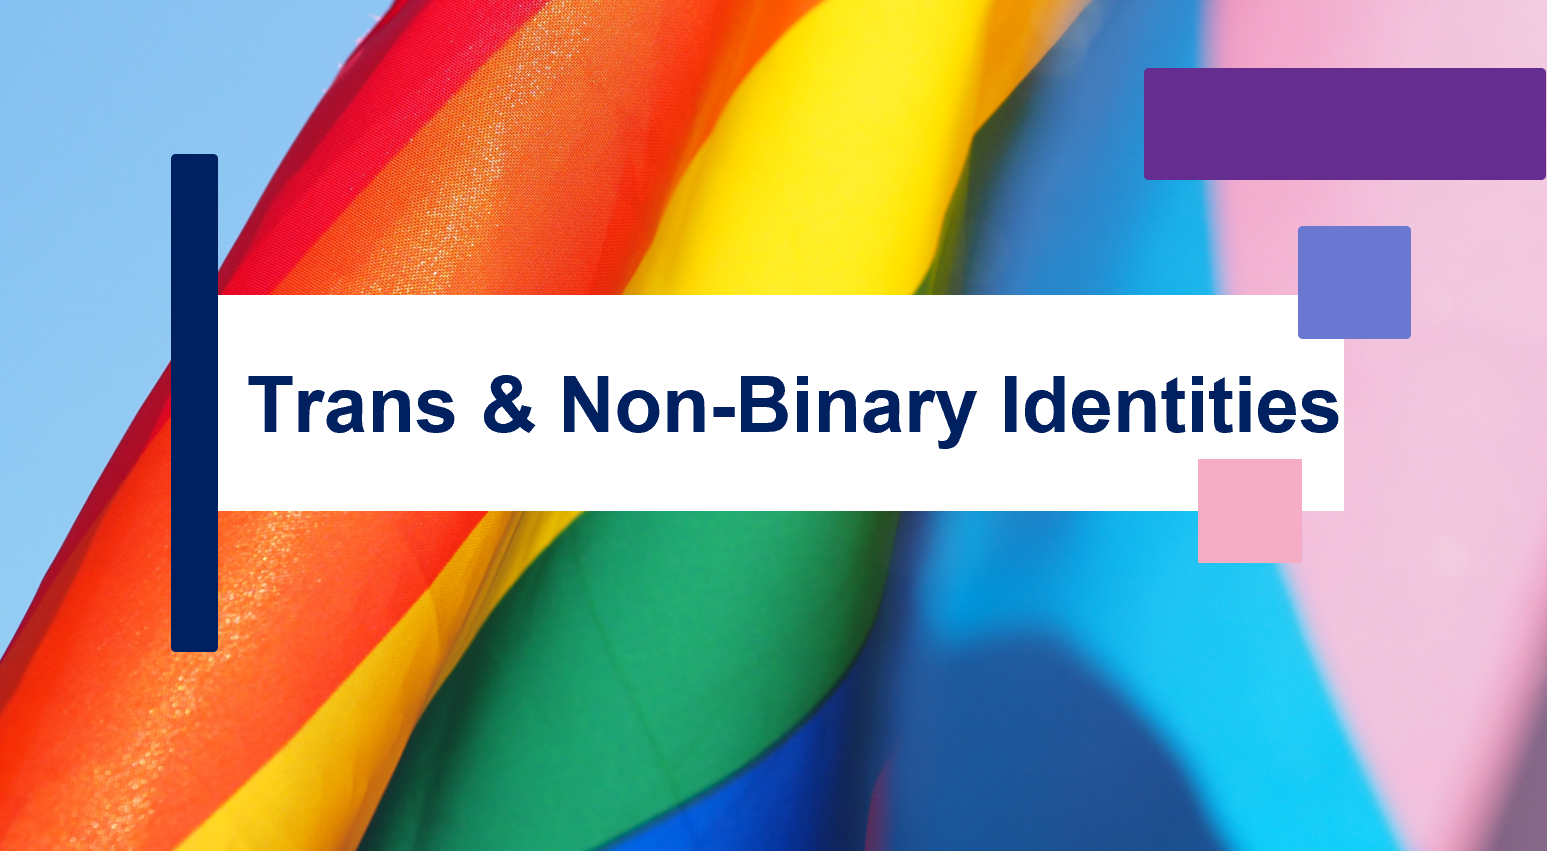 Insights Training Session Image showing title, "Trans & Non-Binary Identities""